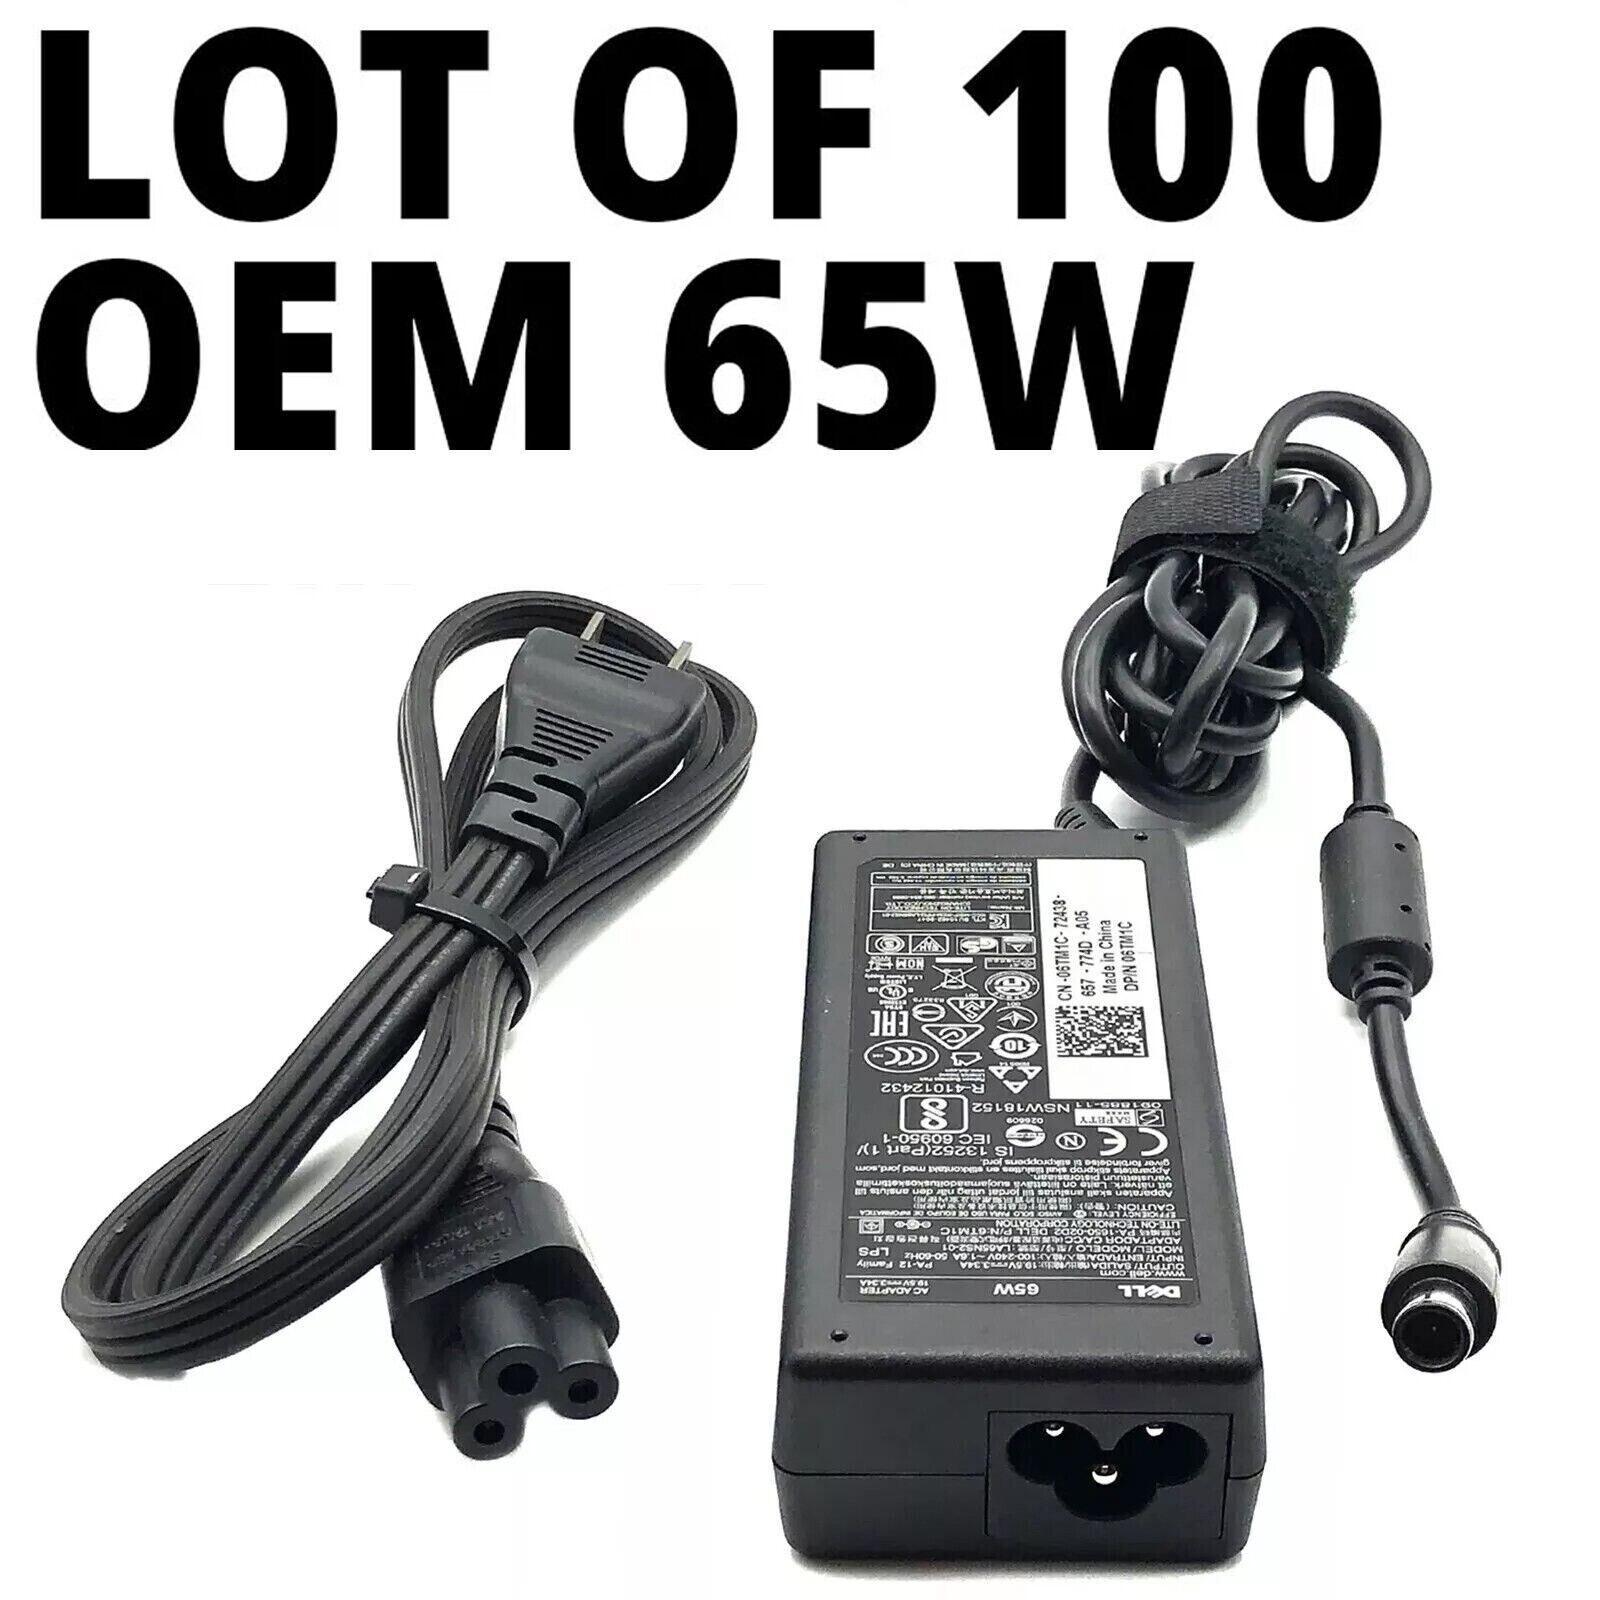 Lot of 100 DELL 65W AC Power Adapter 19.5V 3.34A Brick Style 7.4*5.0mm & Cords